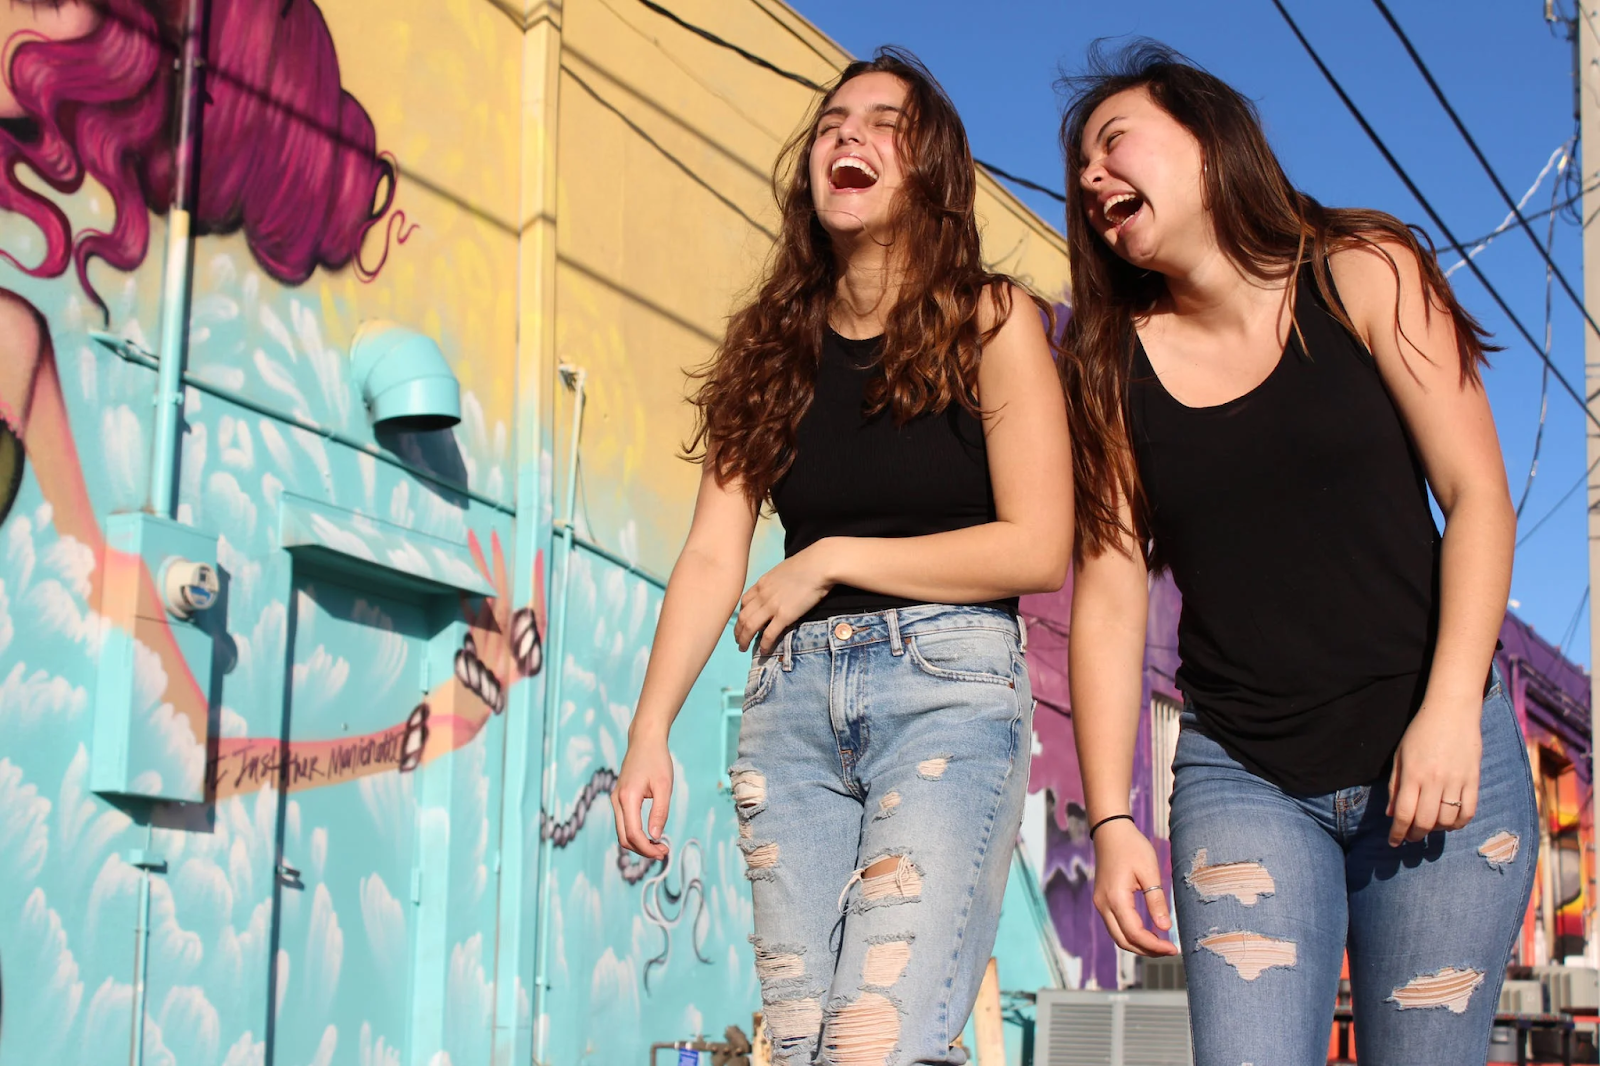 Two women laughing as they walk past a graffiti wall.
